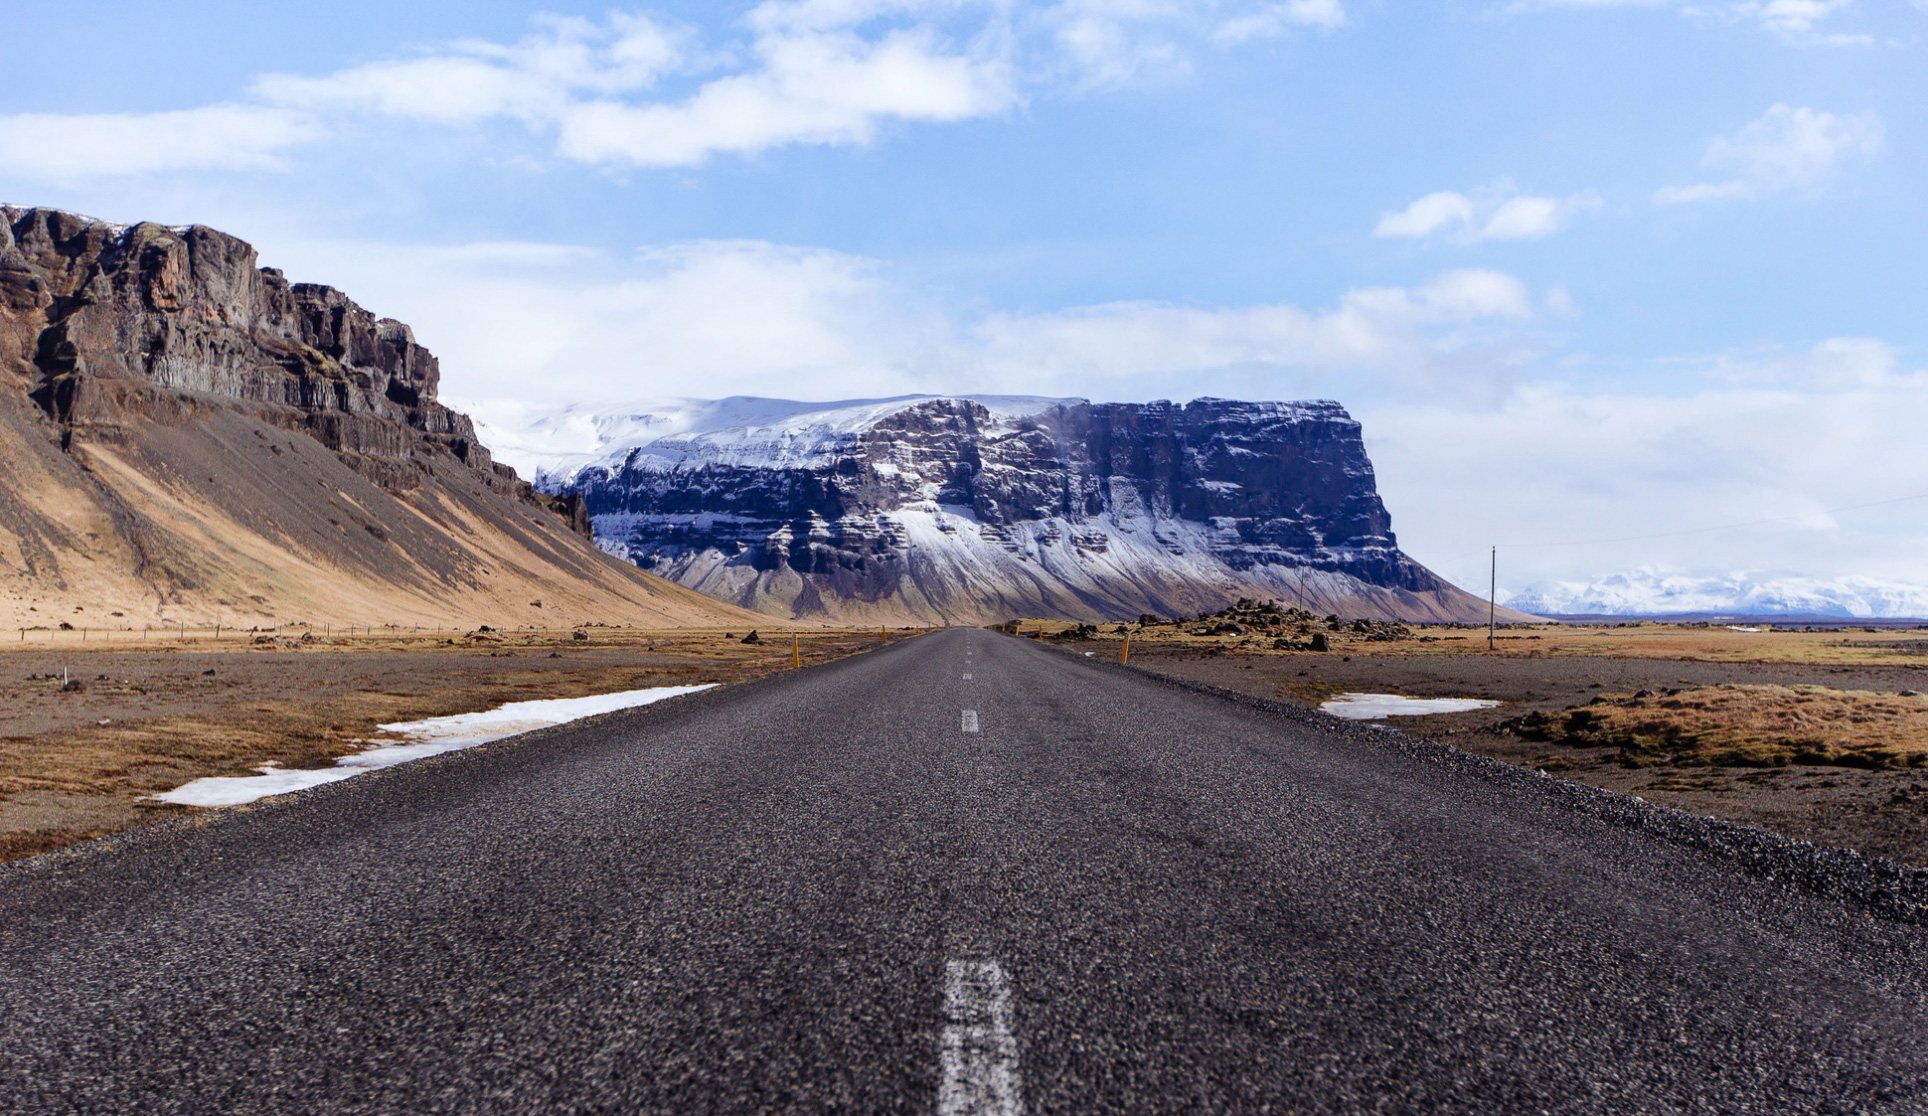 Road trip with mountains. Unsplash - Anders Jilden 